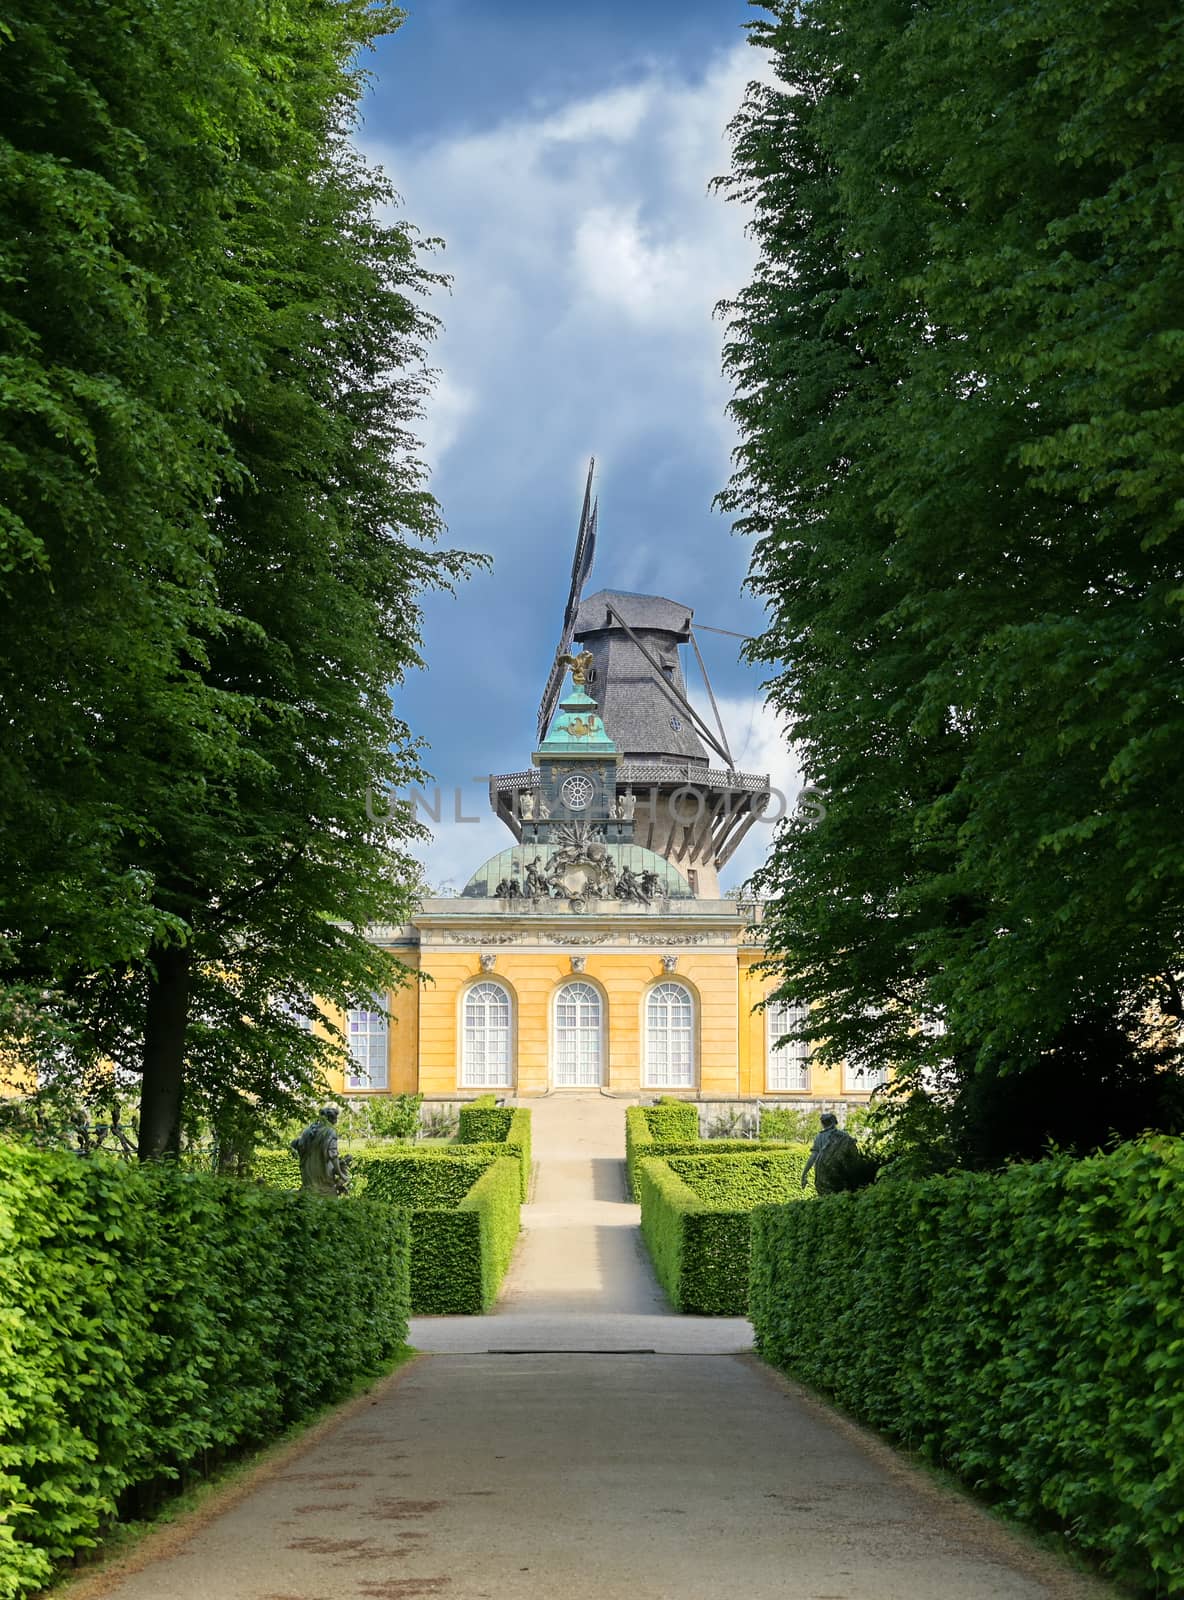 The historic windmill on top of the New Chambers located in Sanssouci Park in Potsdam, Germany.